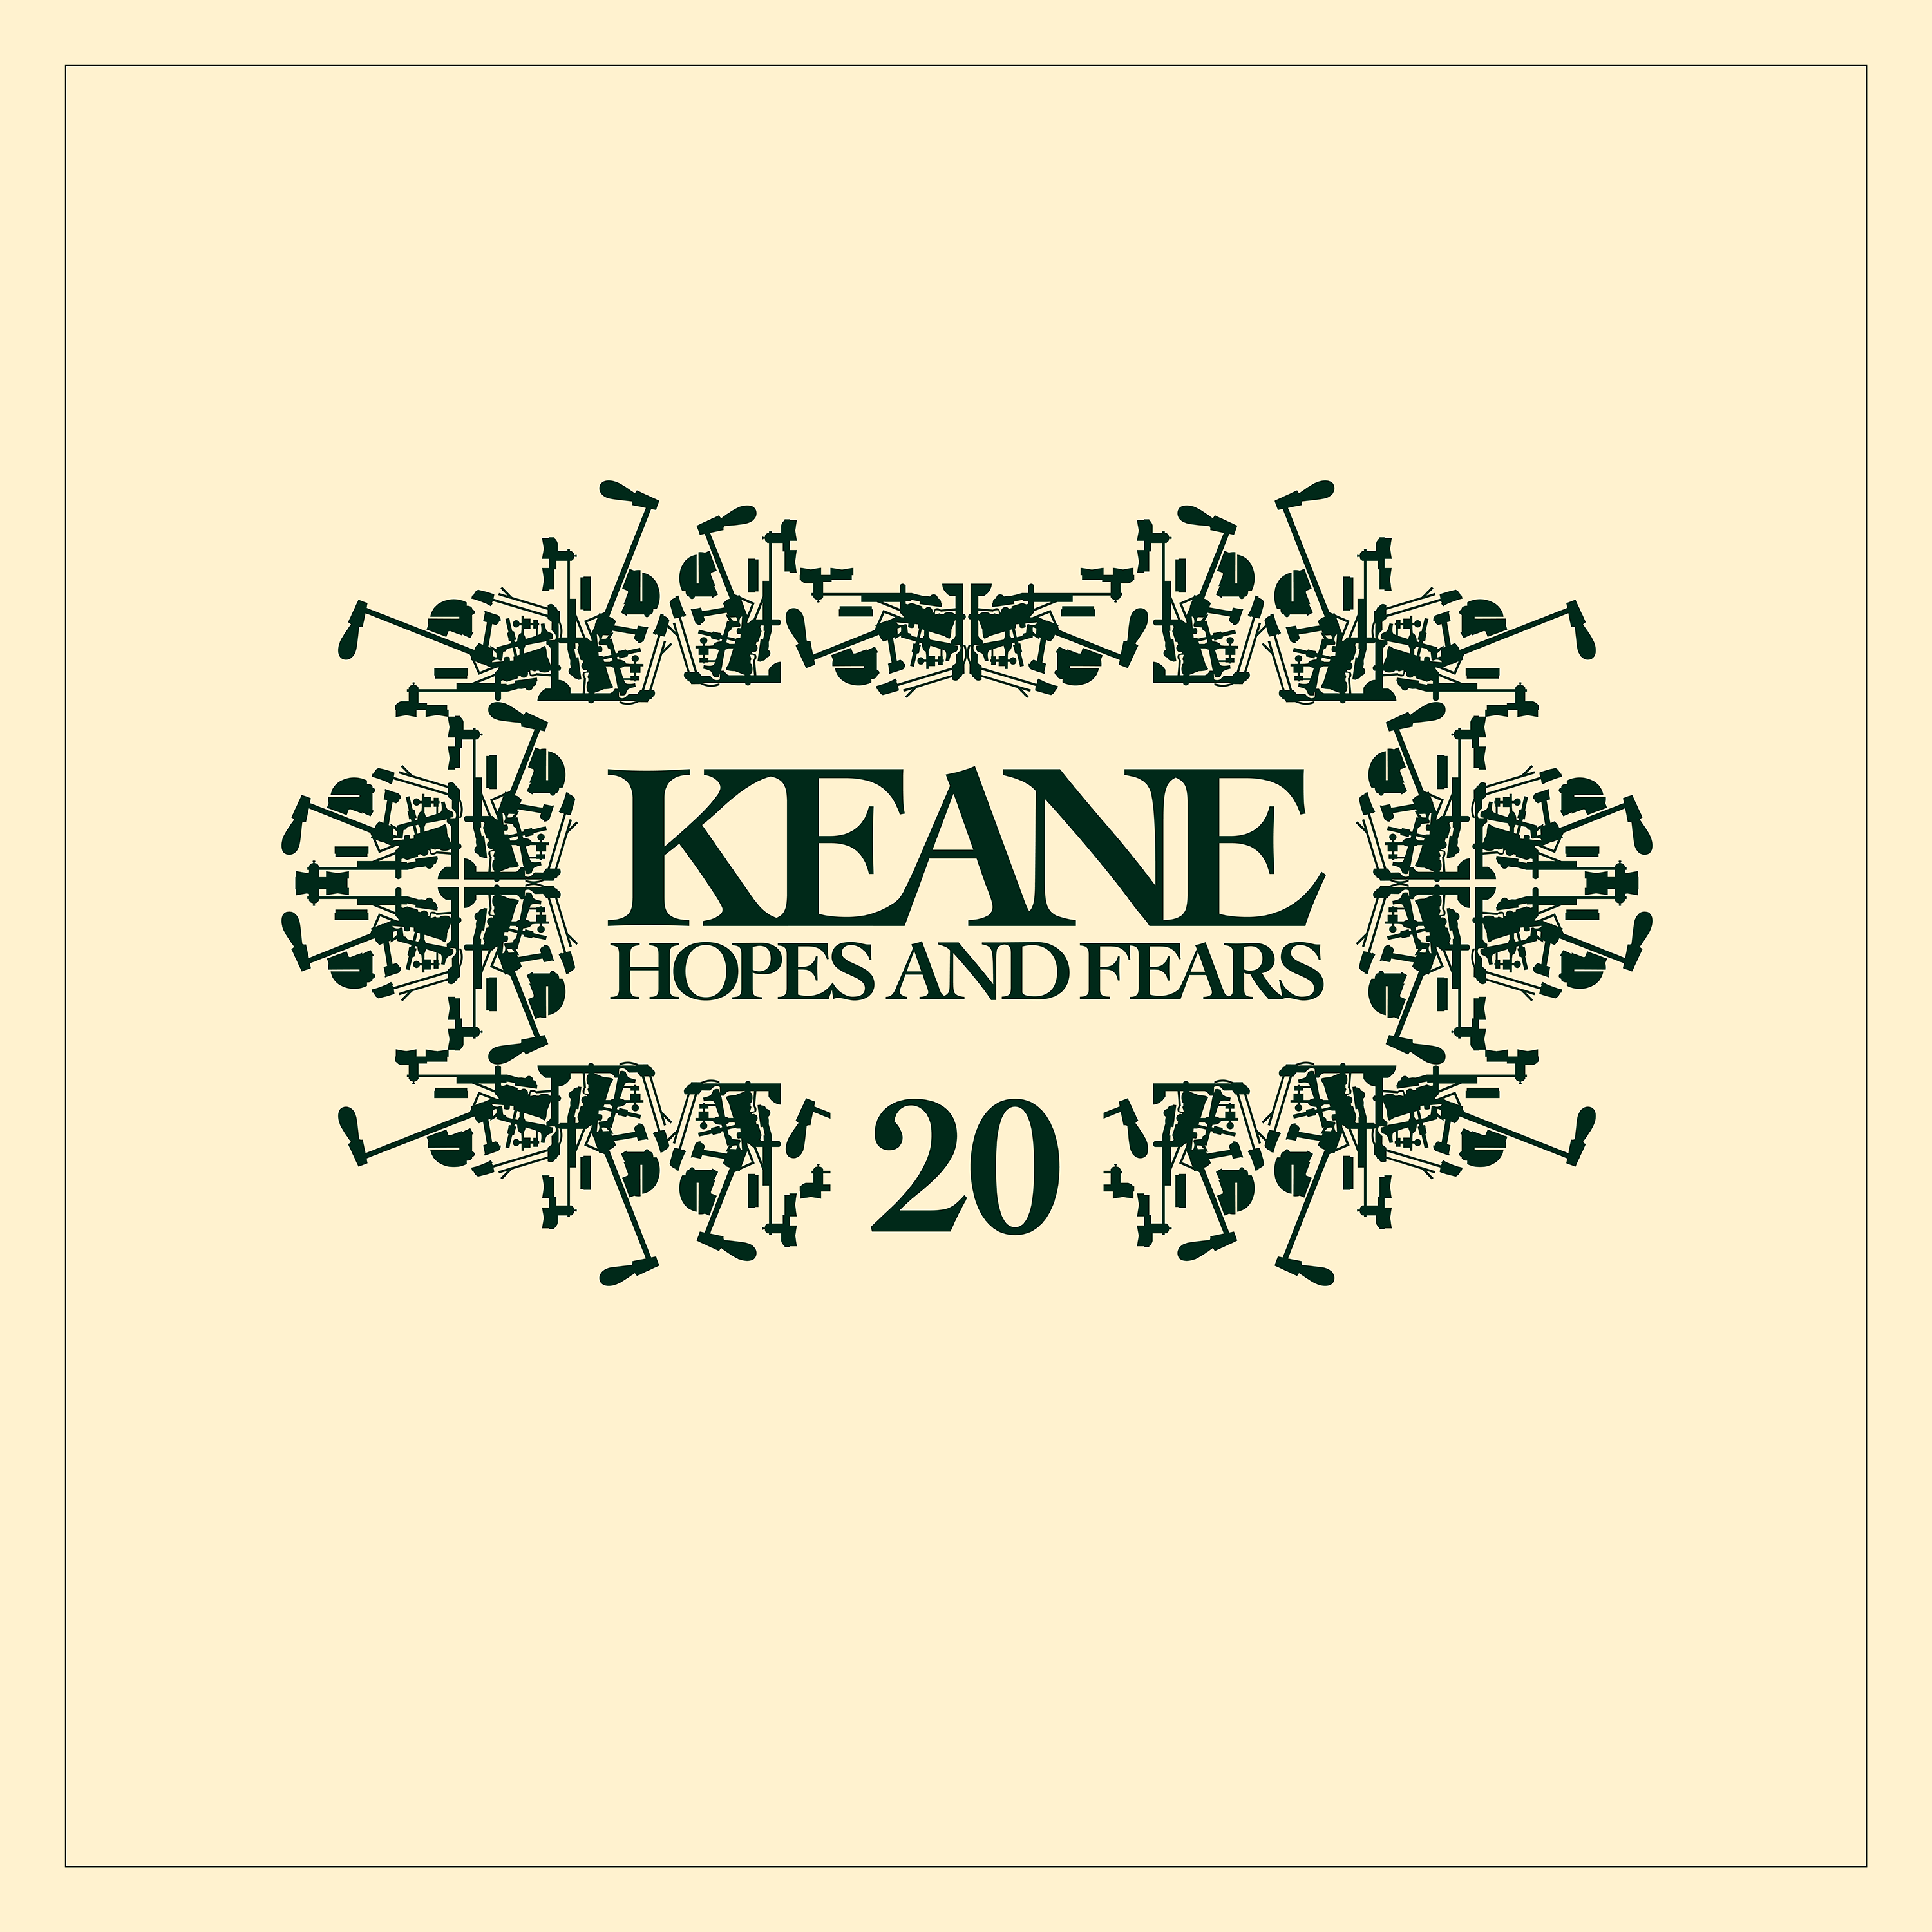 Keane - 20th Anniversary Hopes and Fears Limited 3CD